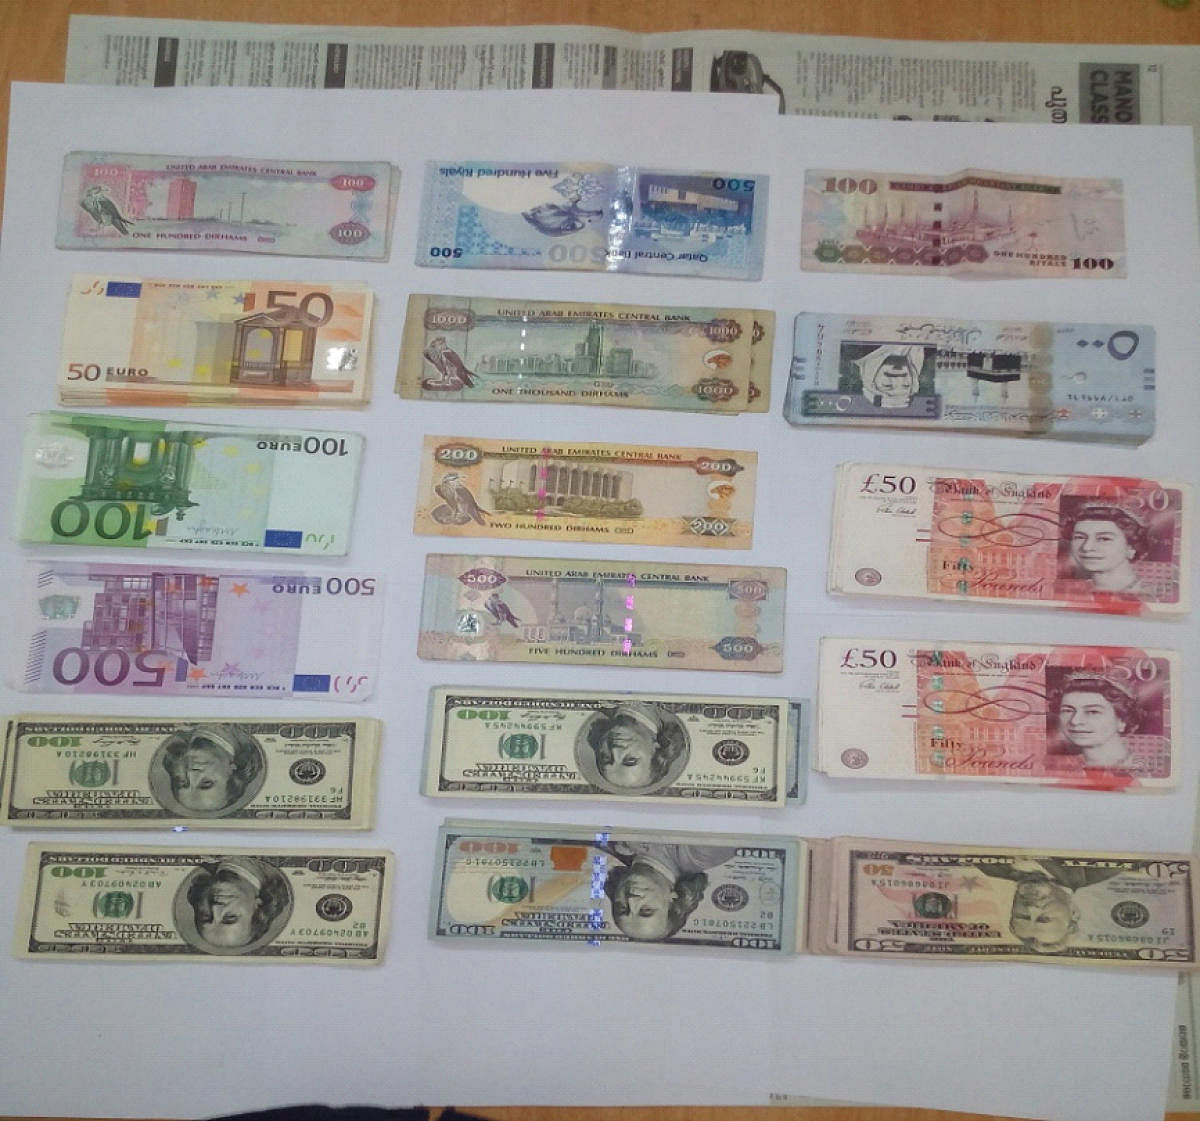 Foreign currency seized from a passenger at Mangaluru International Airport.